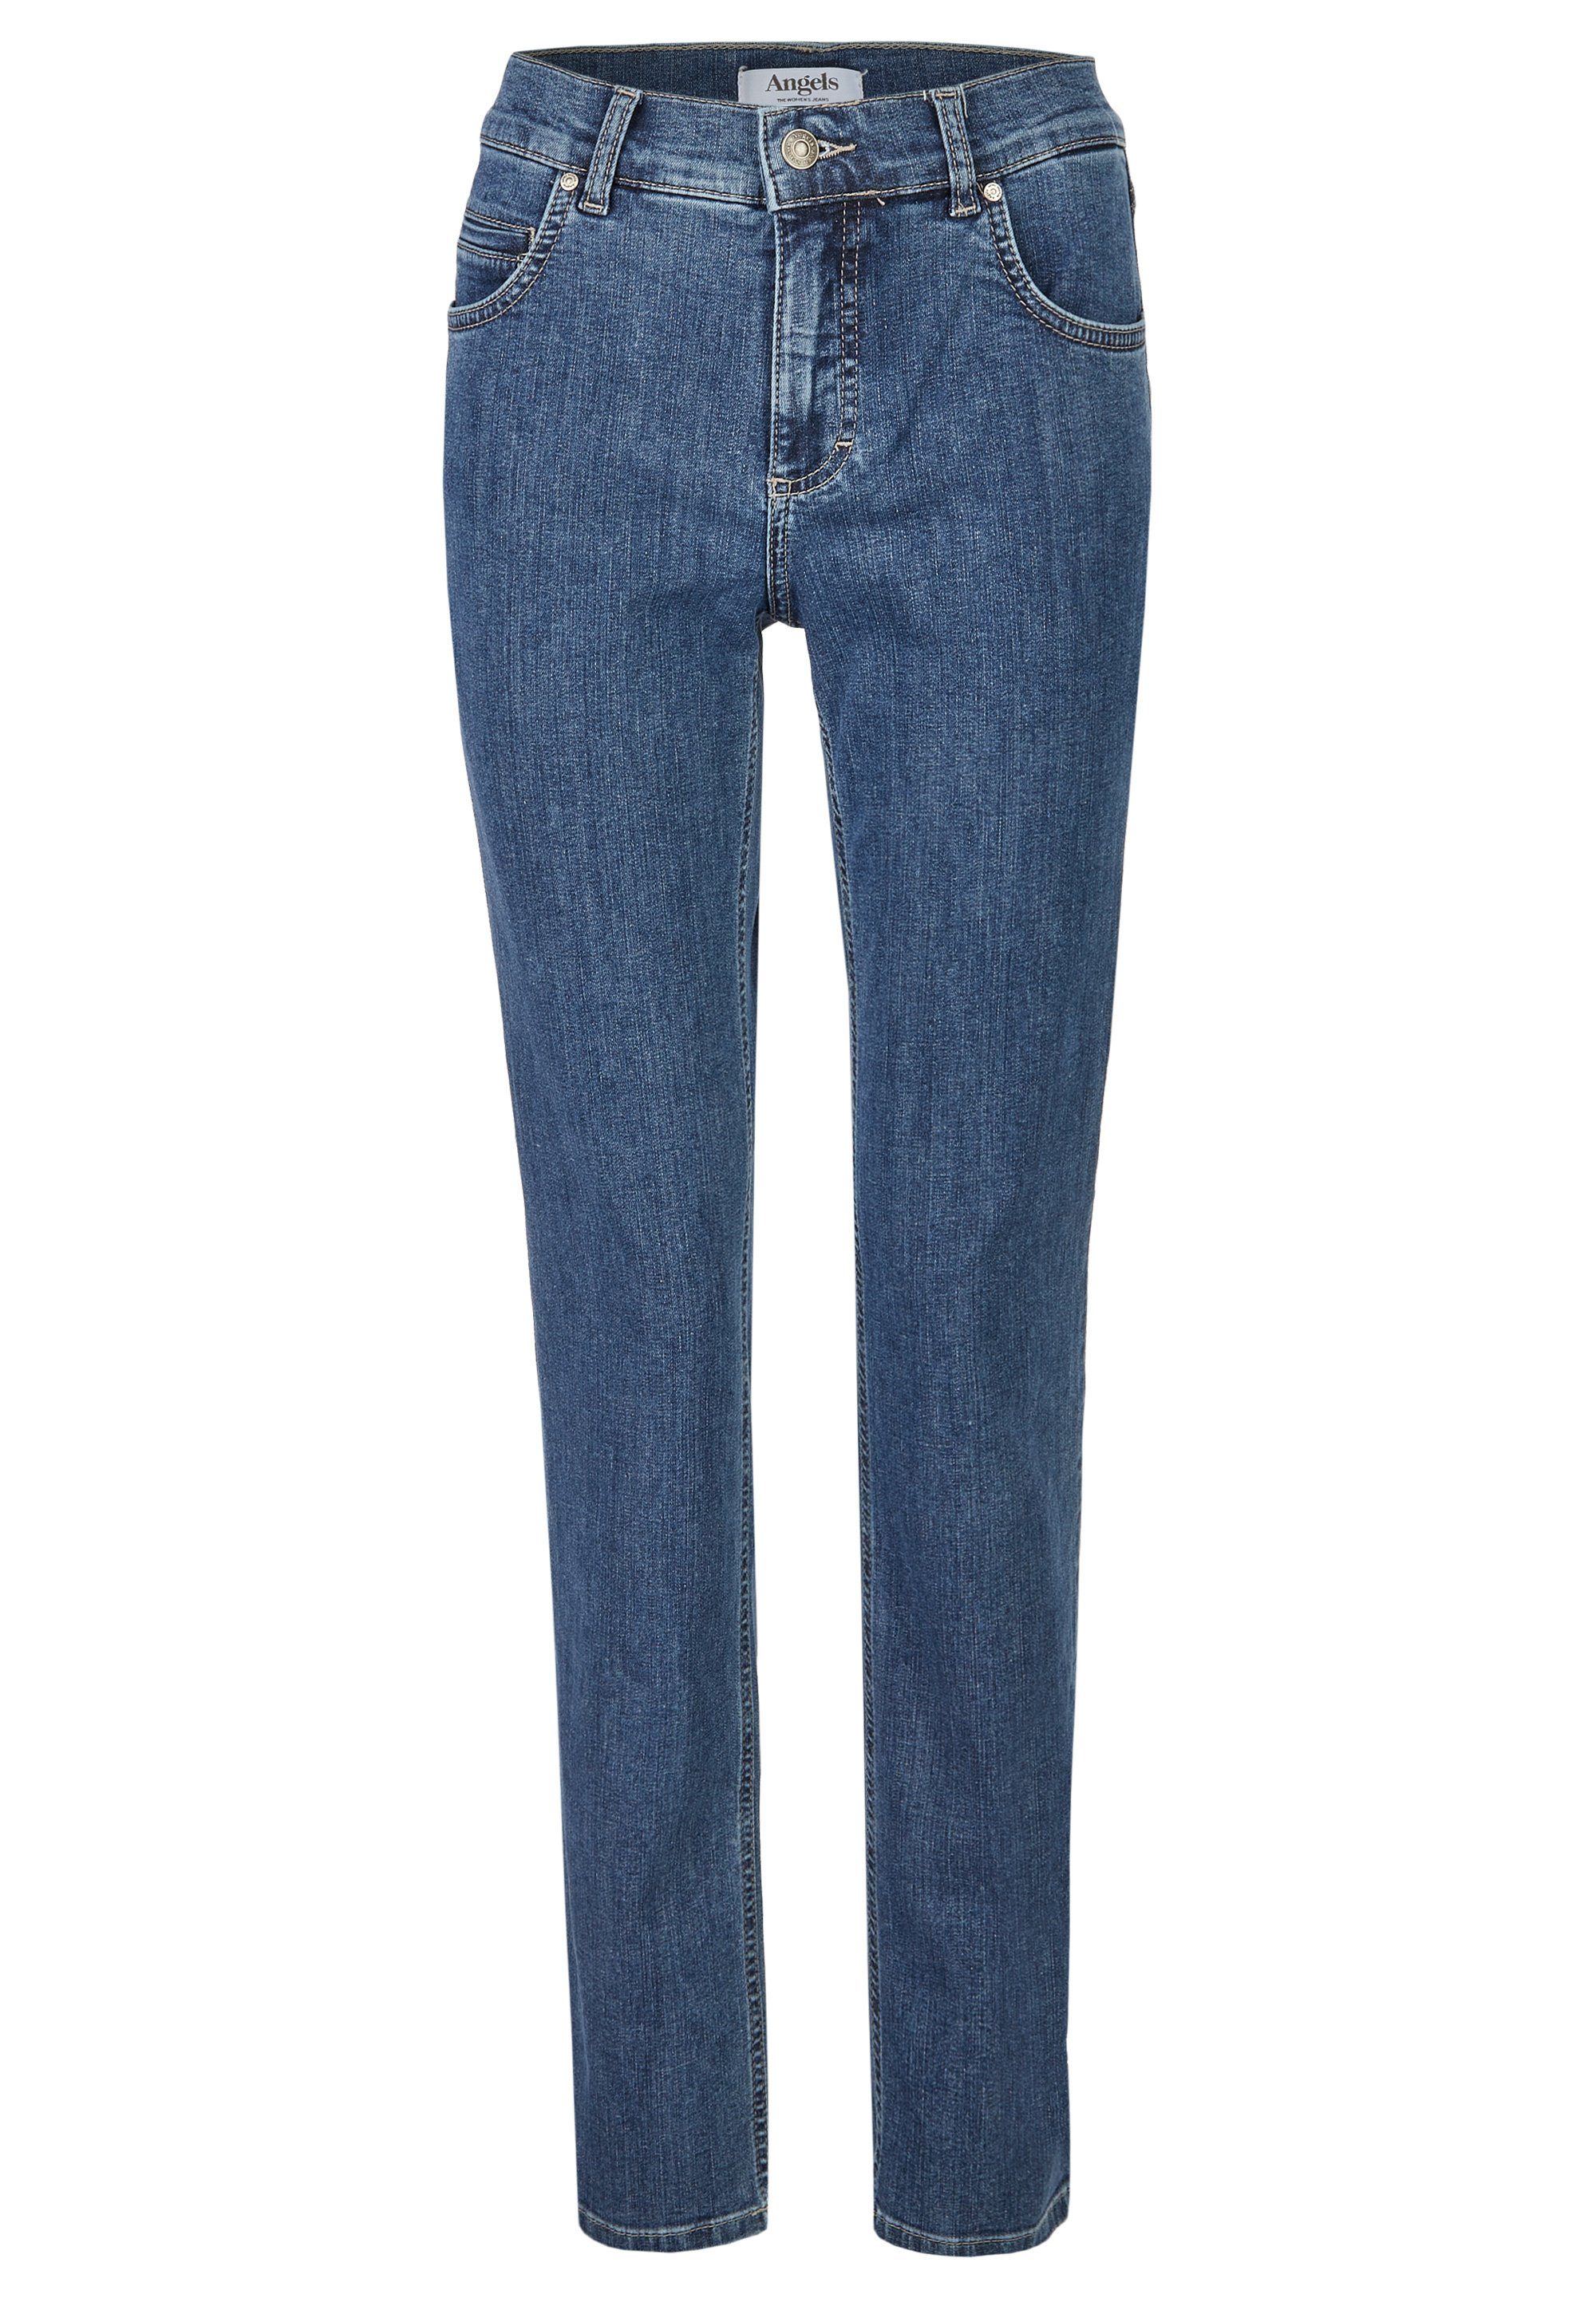 3400.33 - Stretch-Jeans ANGELS JEANS CICI STRETCH blue 346 mid ANGELS